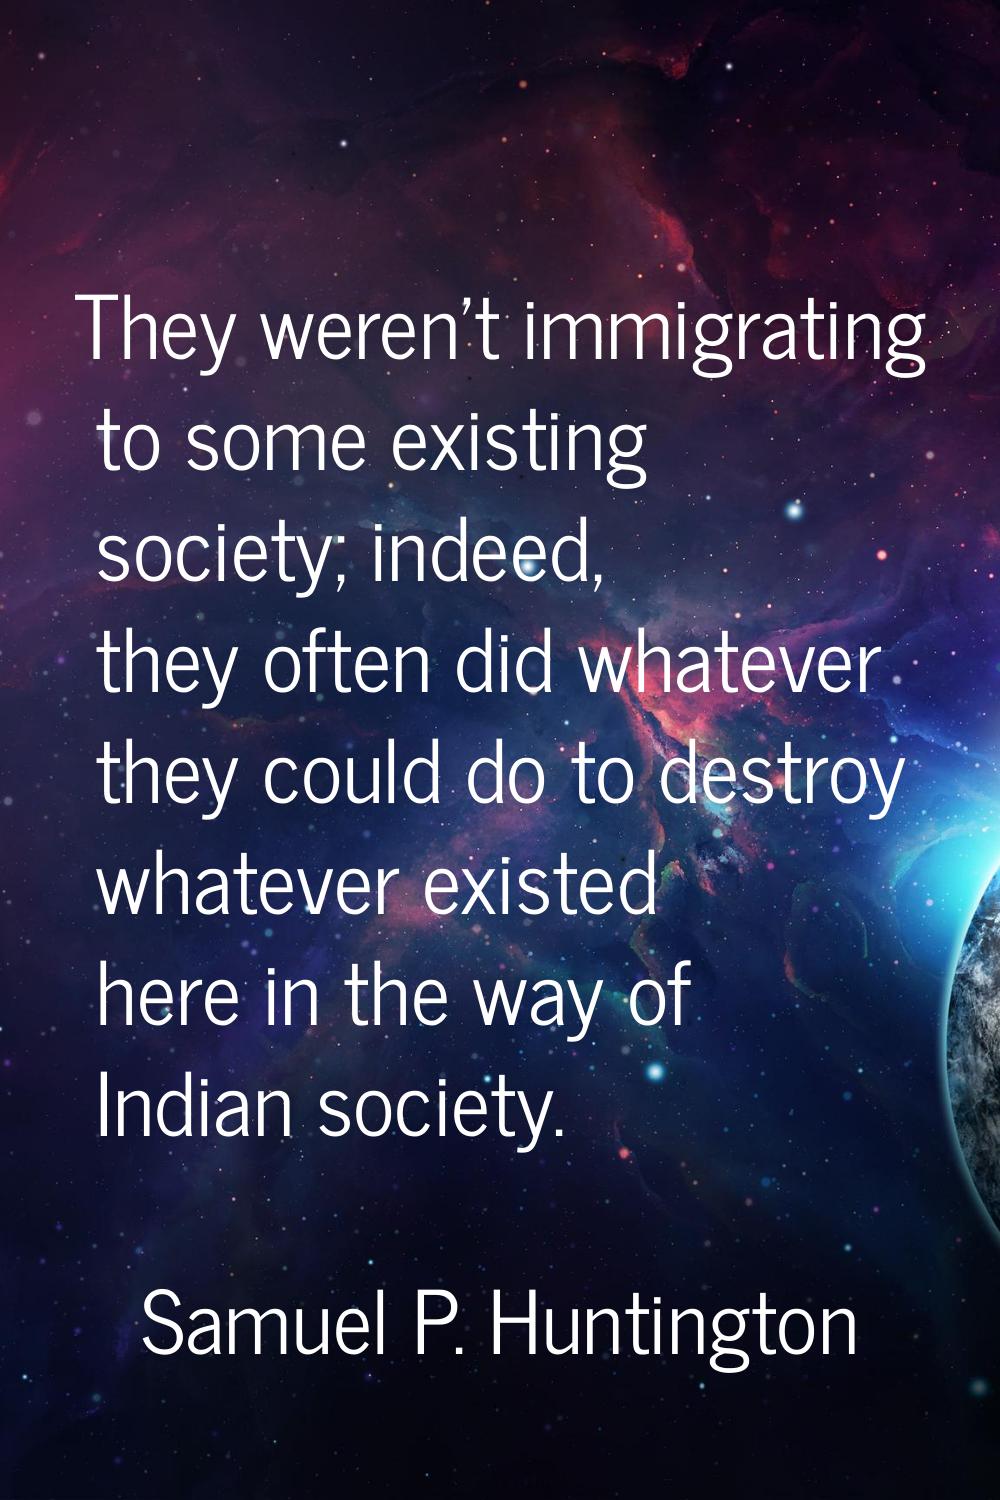 They weren't immigrating to some existing society; indeed, they often did whatever they could do to